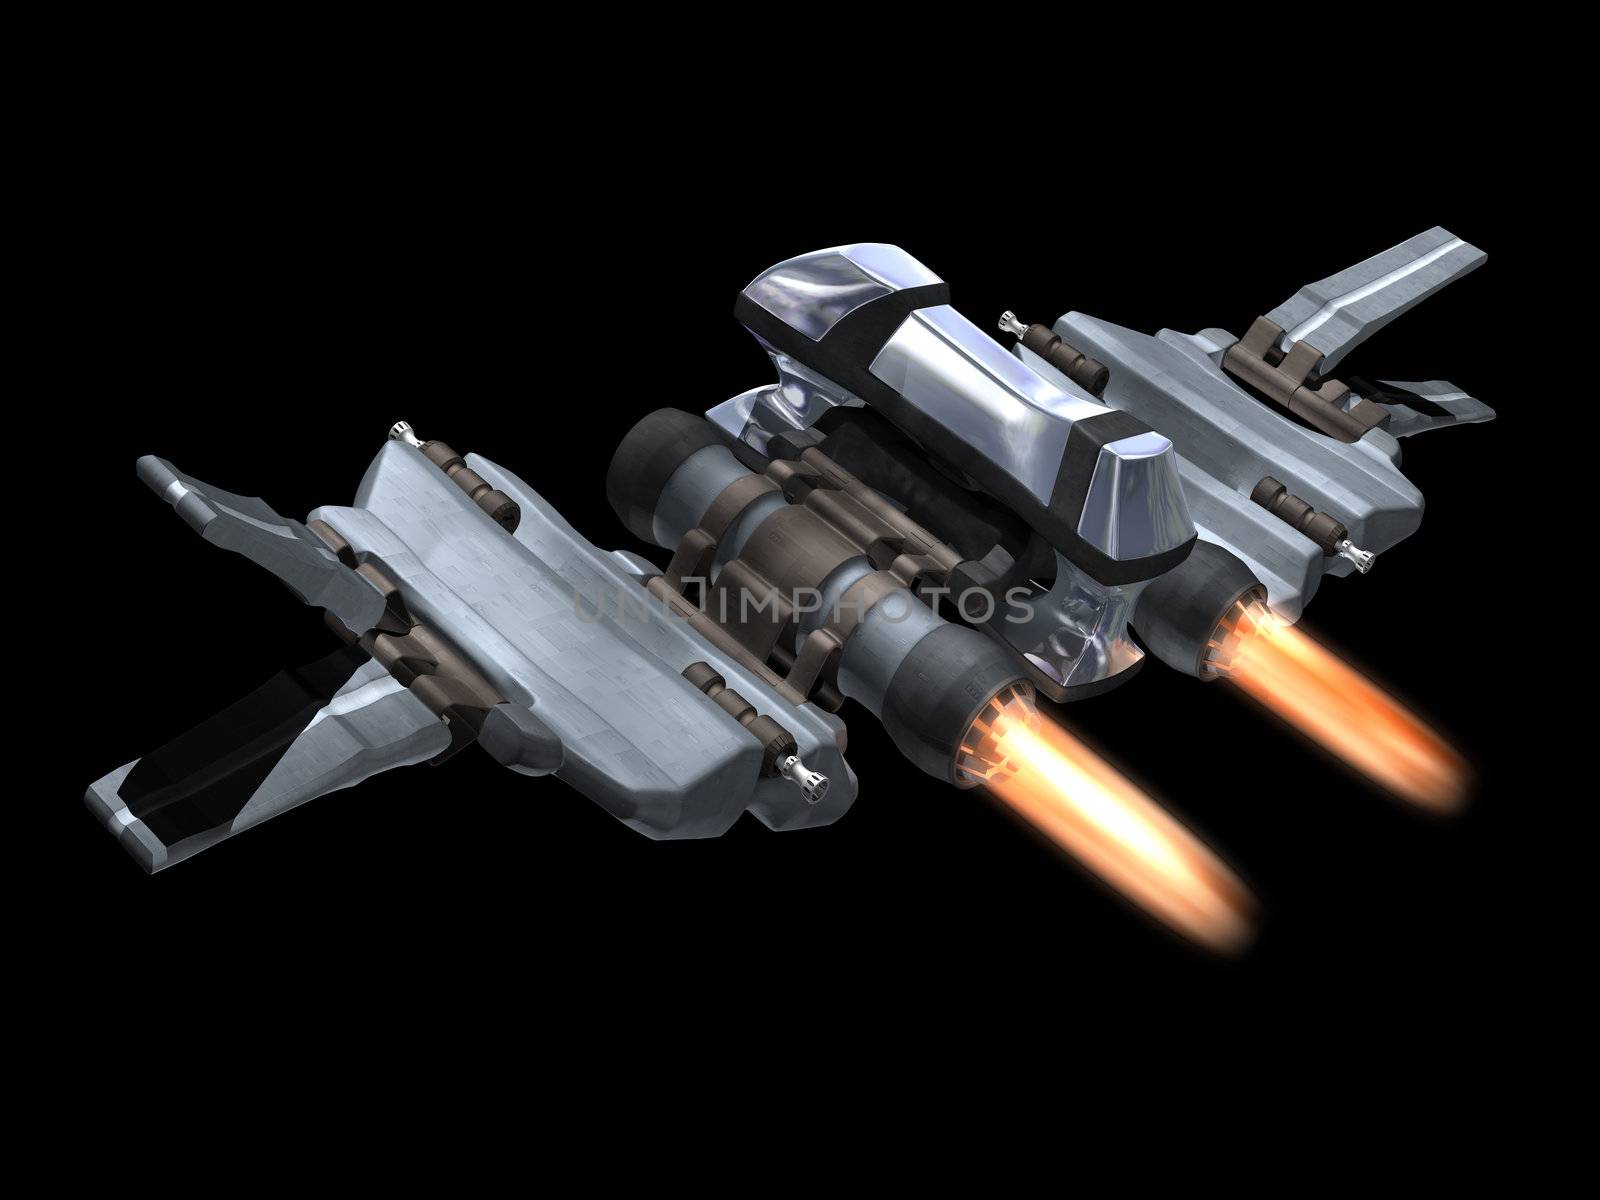 Back and above view of a StarFighter in action with a black background